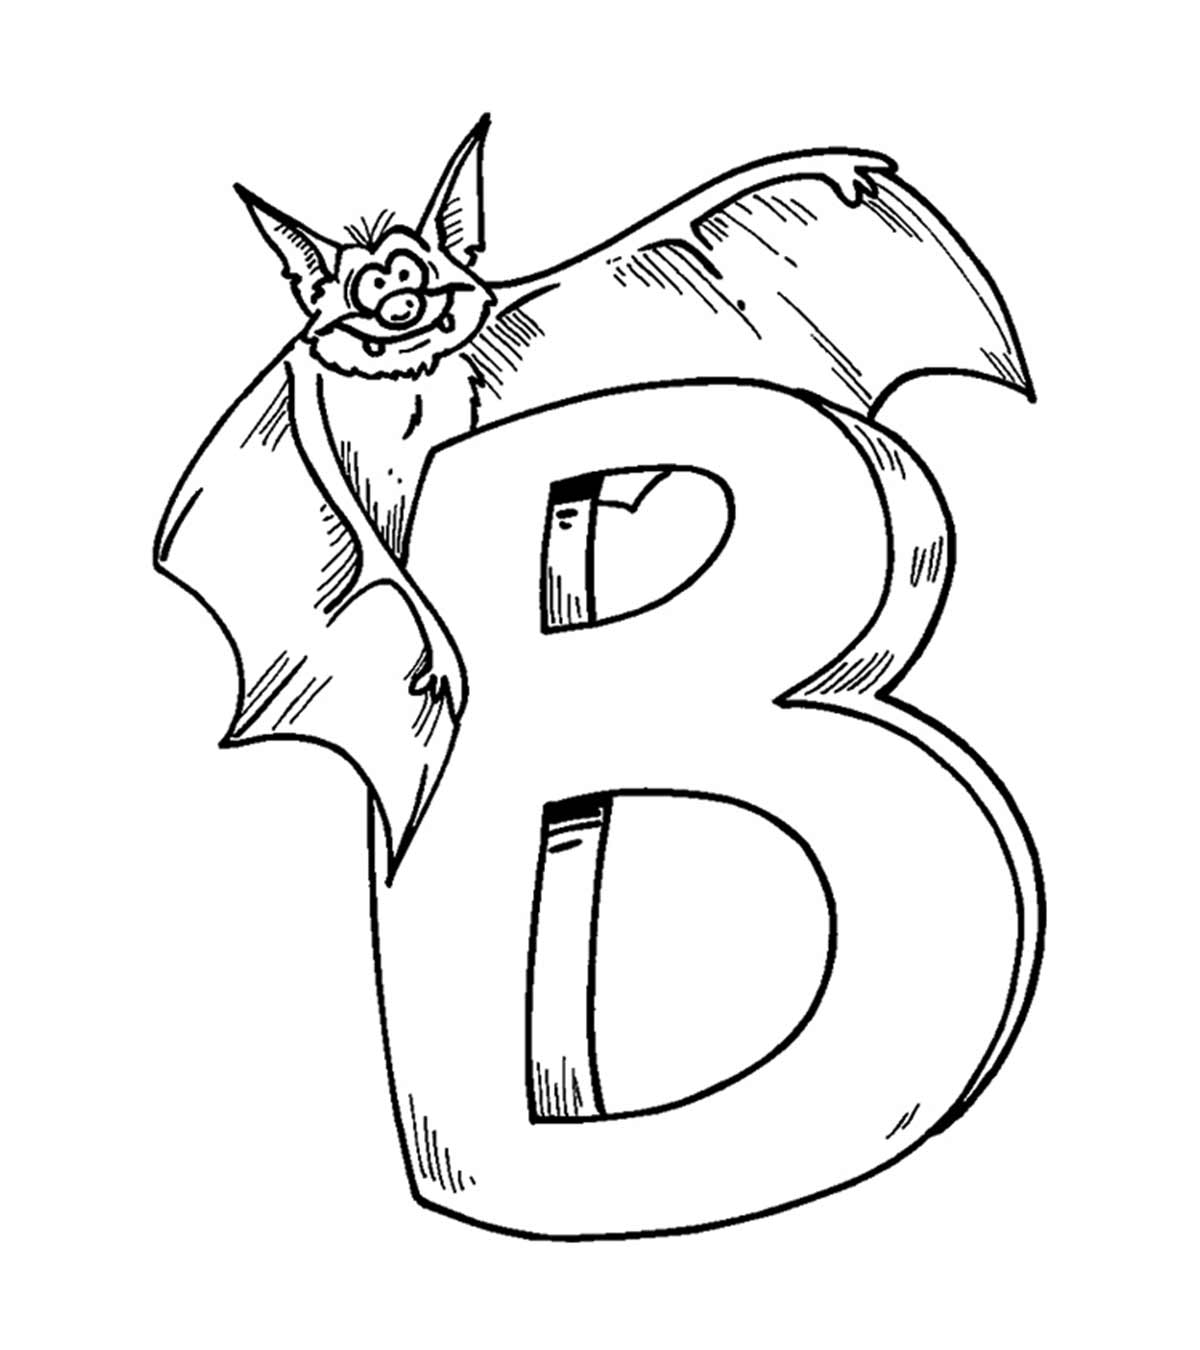 Bat Coloring Pages For Kids - Creative Hobby Place